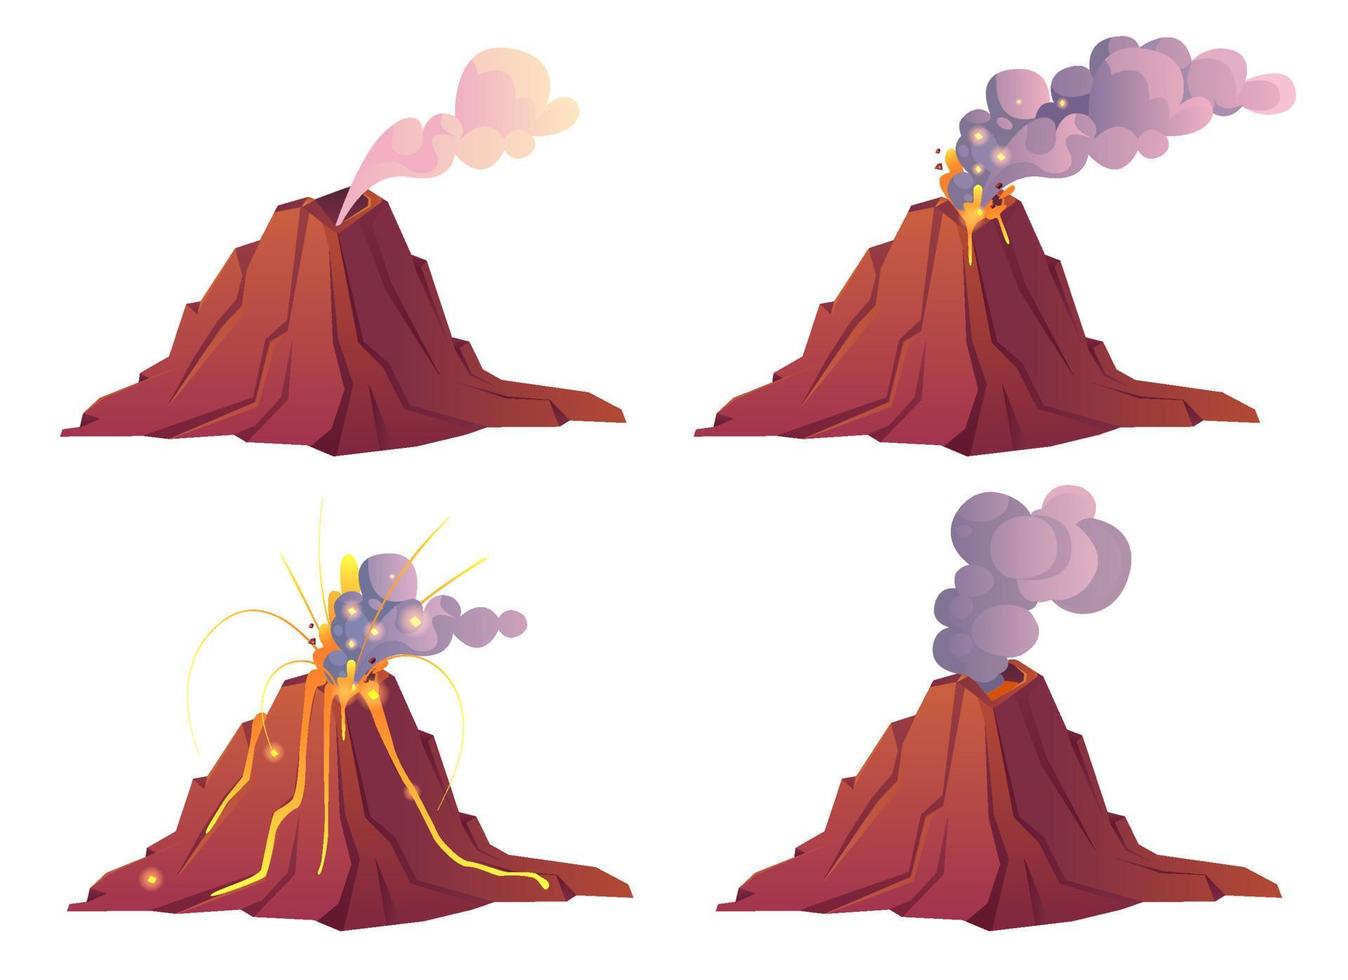 Volcanic eruption stages with lava, fire and smoke vector